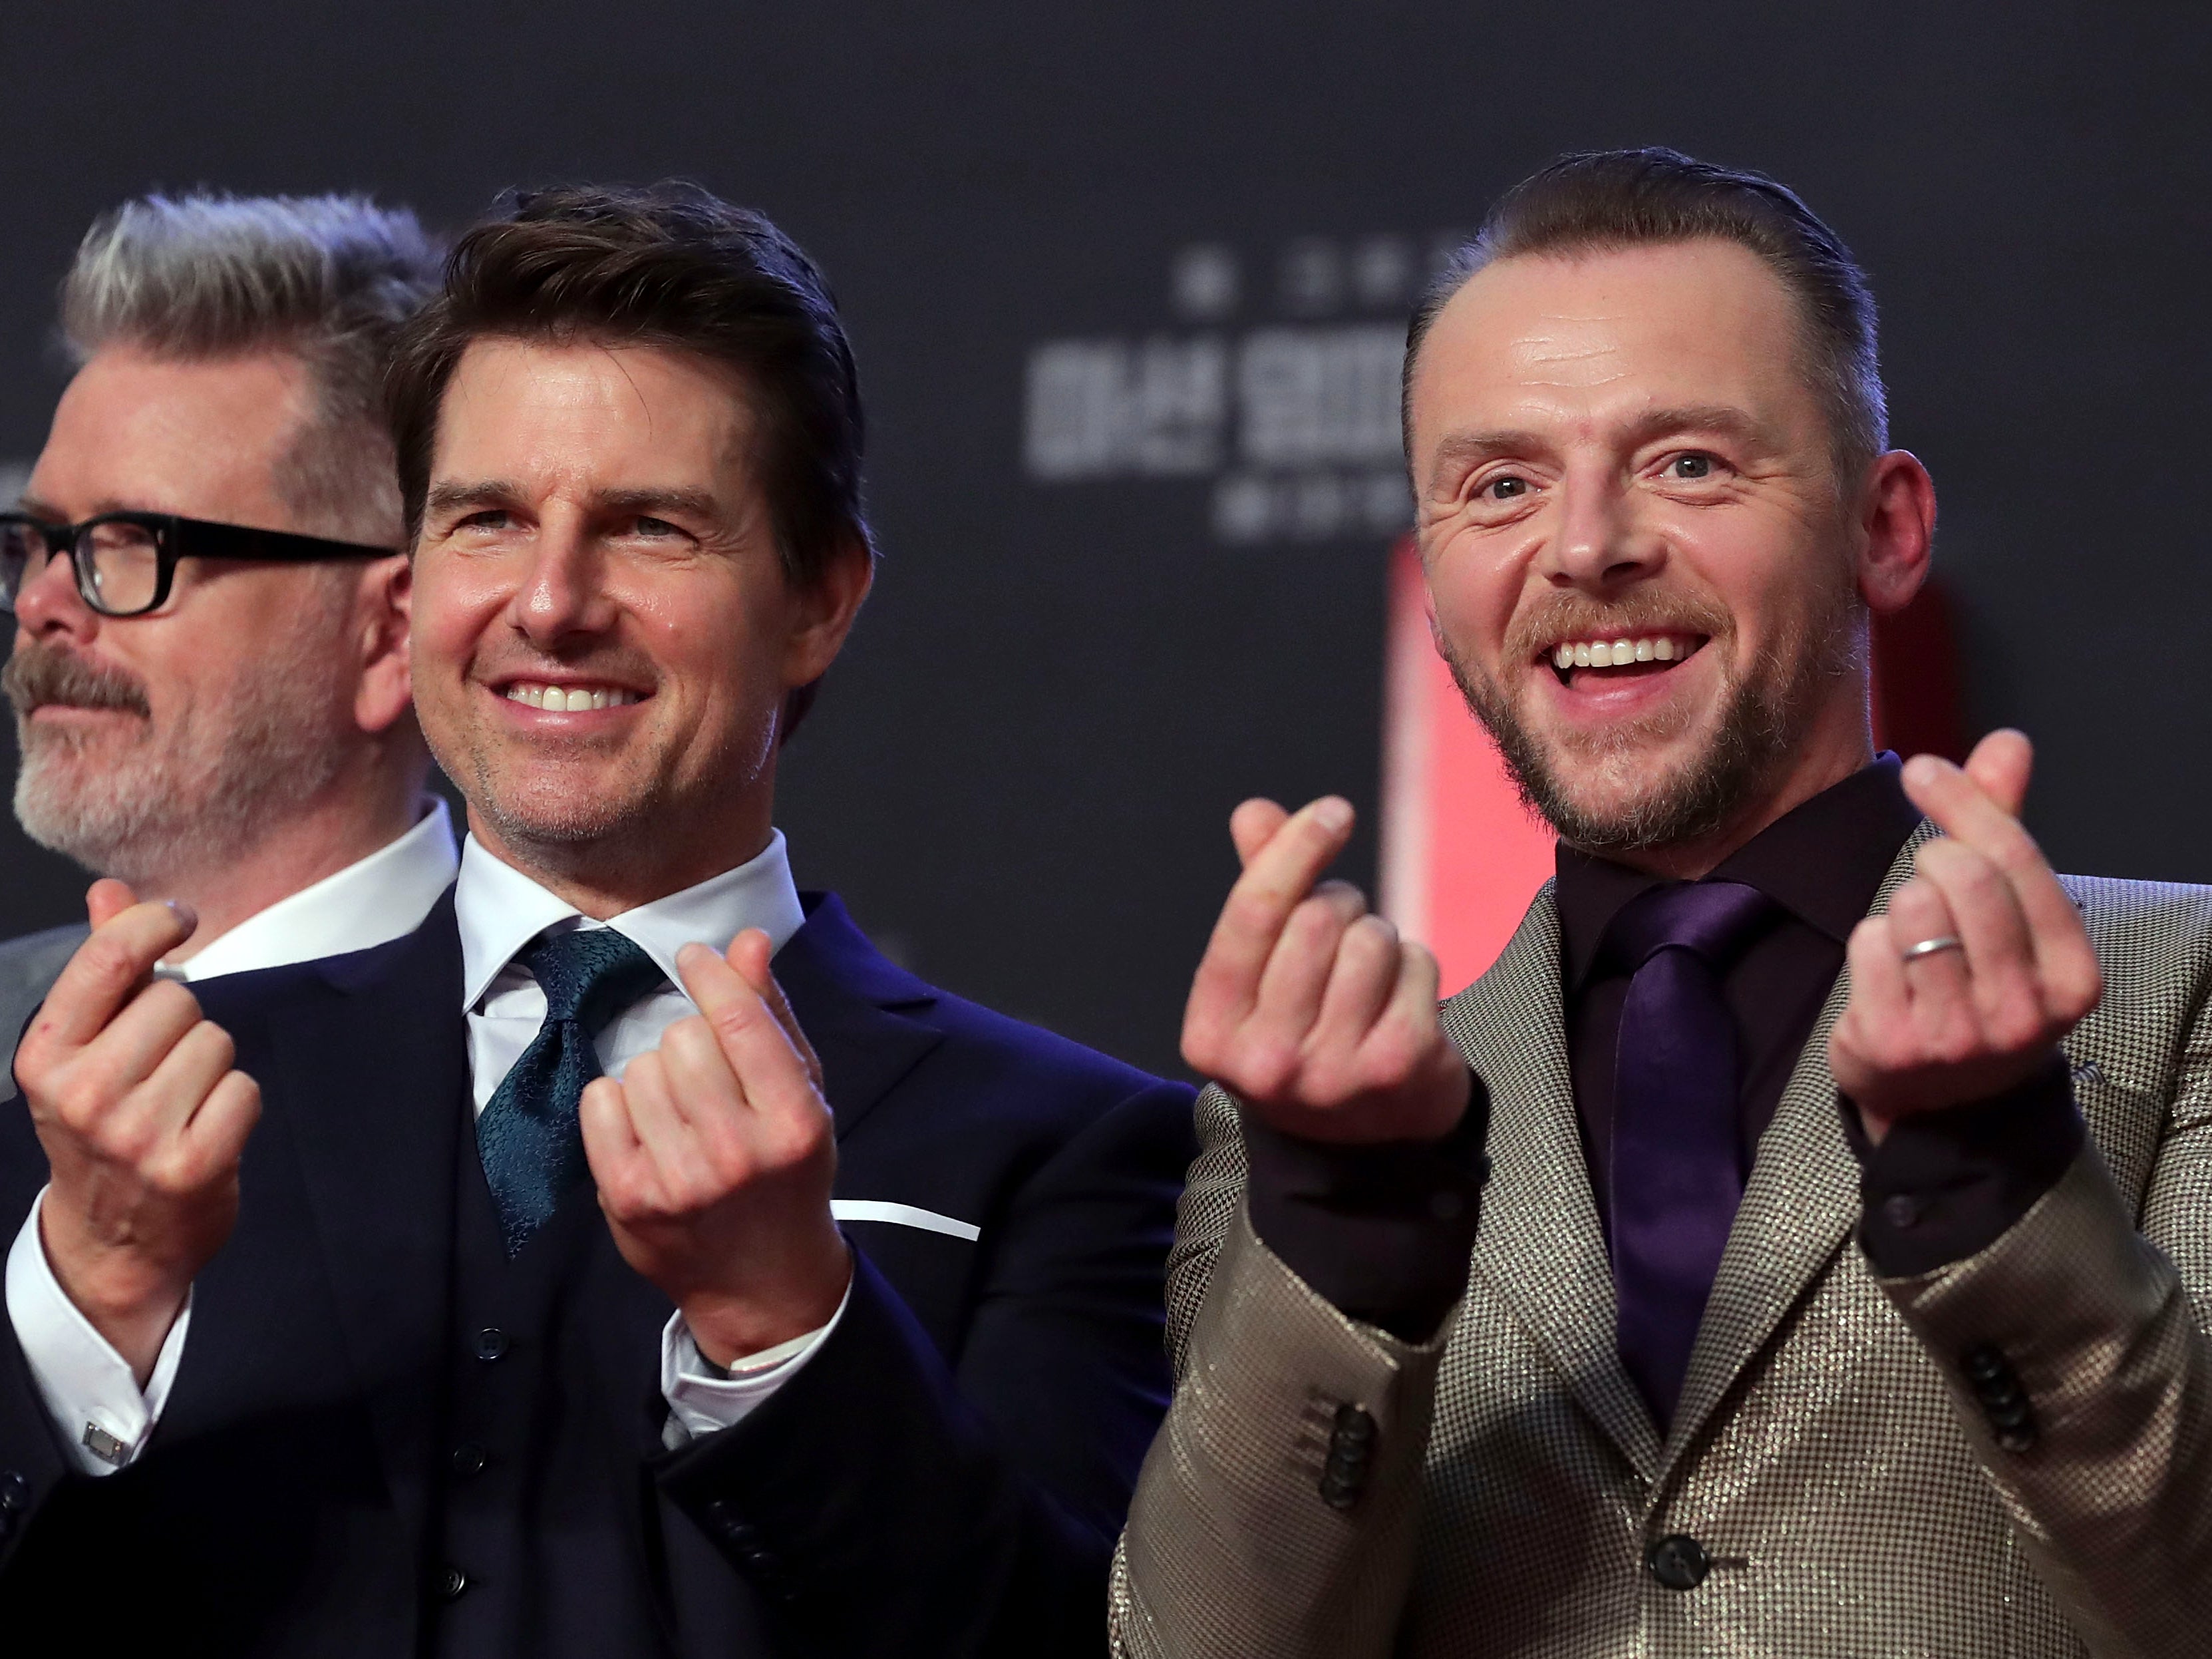 Hearts in their eyes: Tom Cruise and Simon Pegg